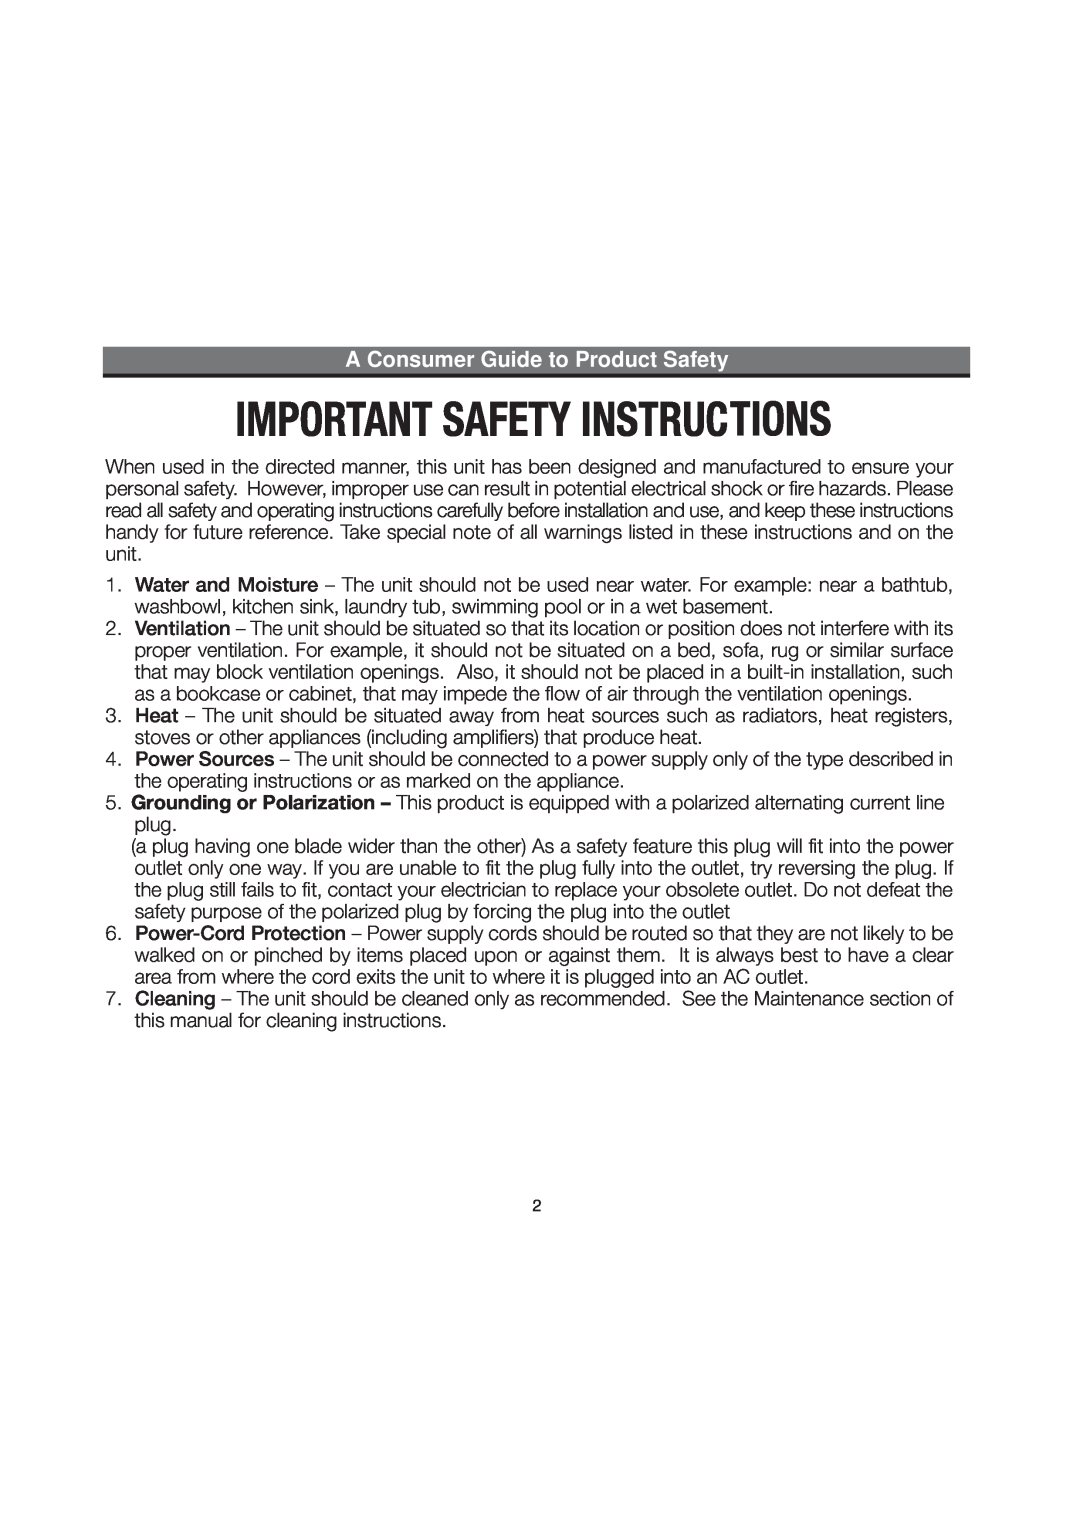 iHome IH52 manual A Consumer Guide to Product Safety 